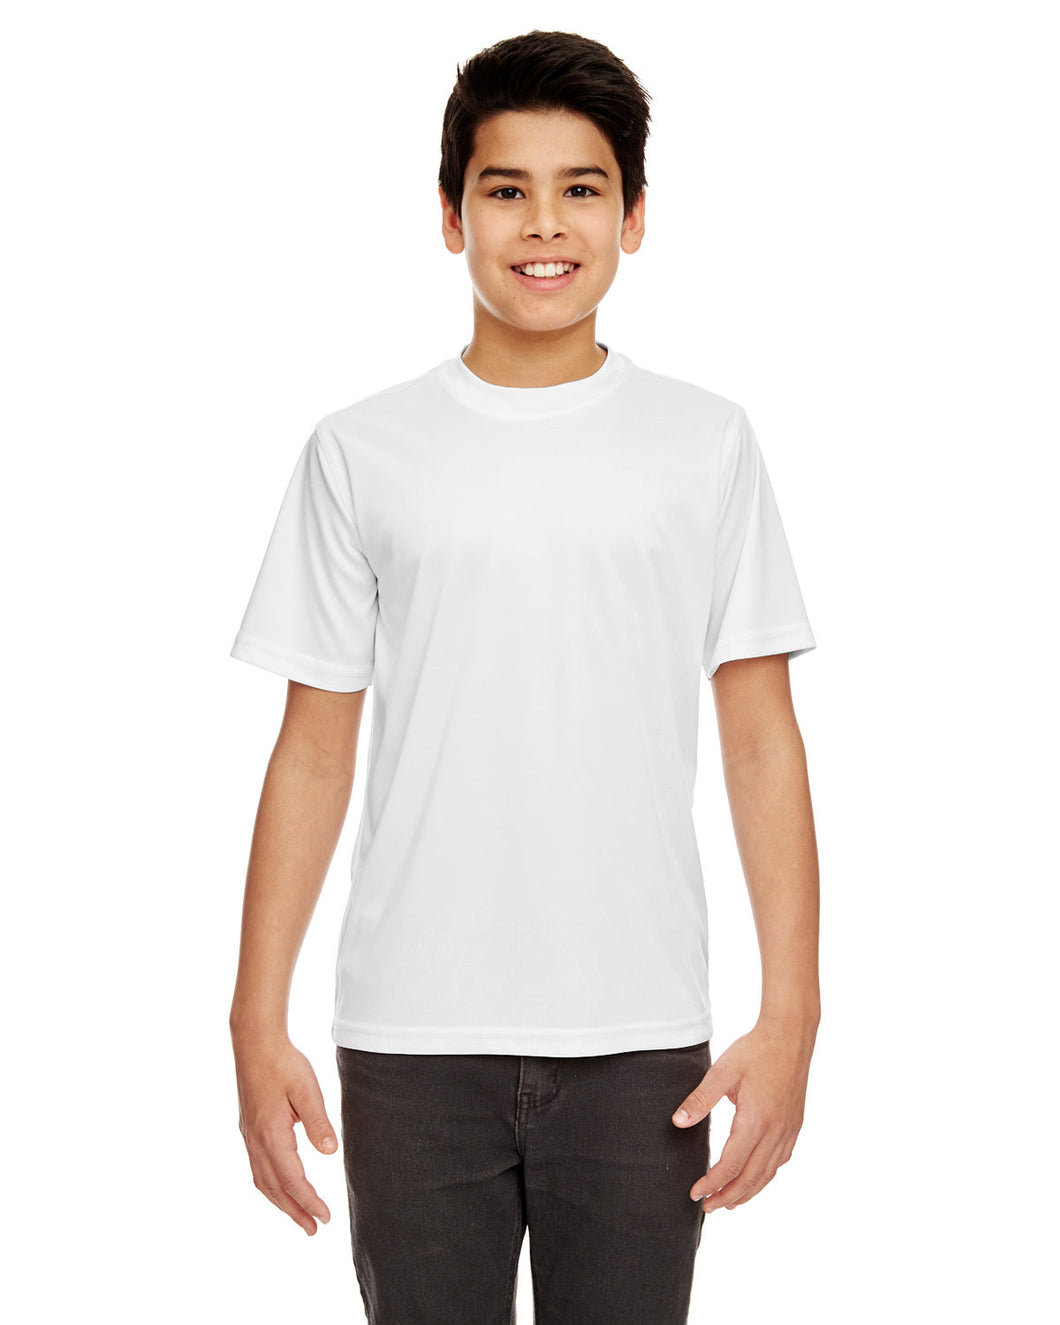 Youth Shirt Dry-Power Performance Short Sleeve T-Shirt Youth